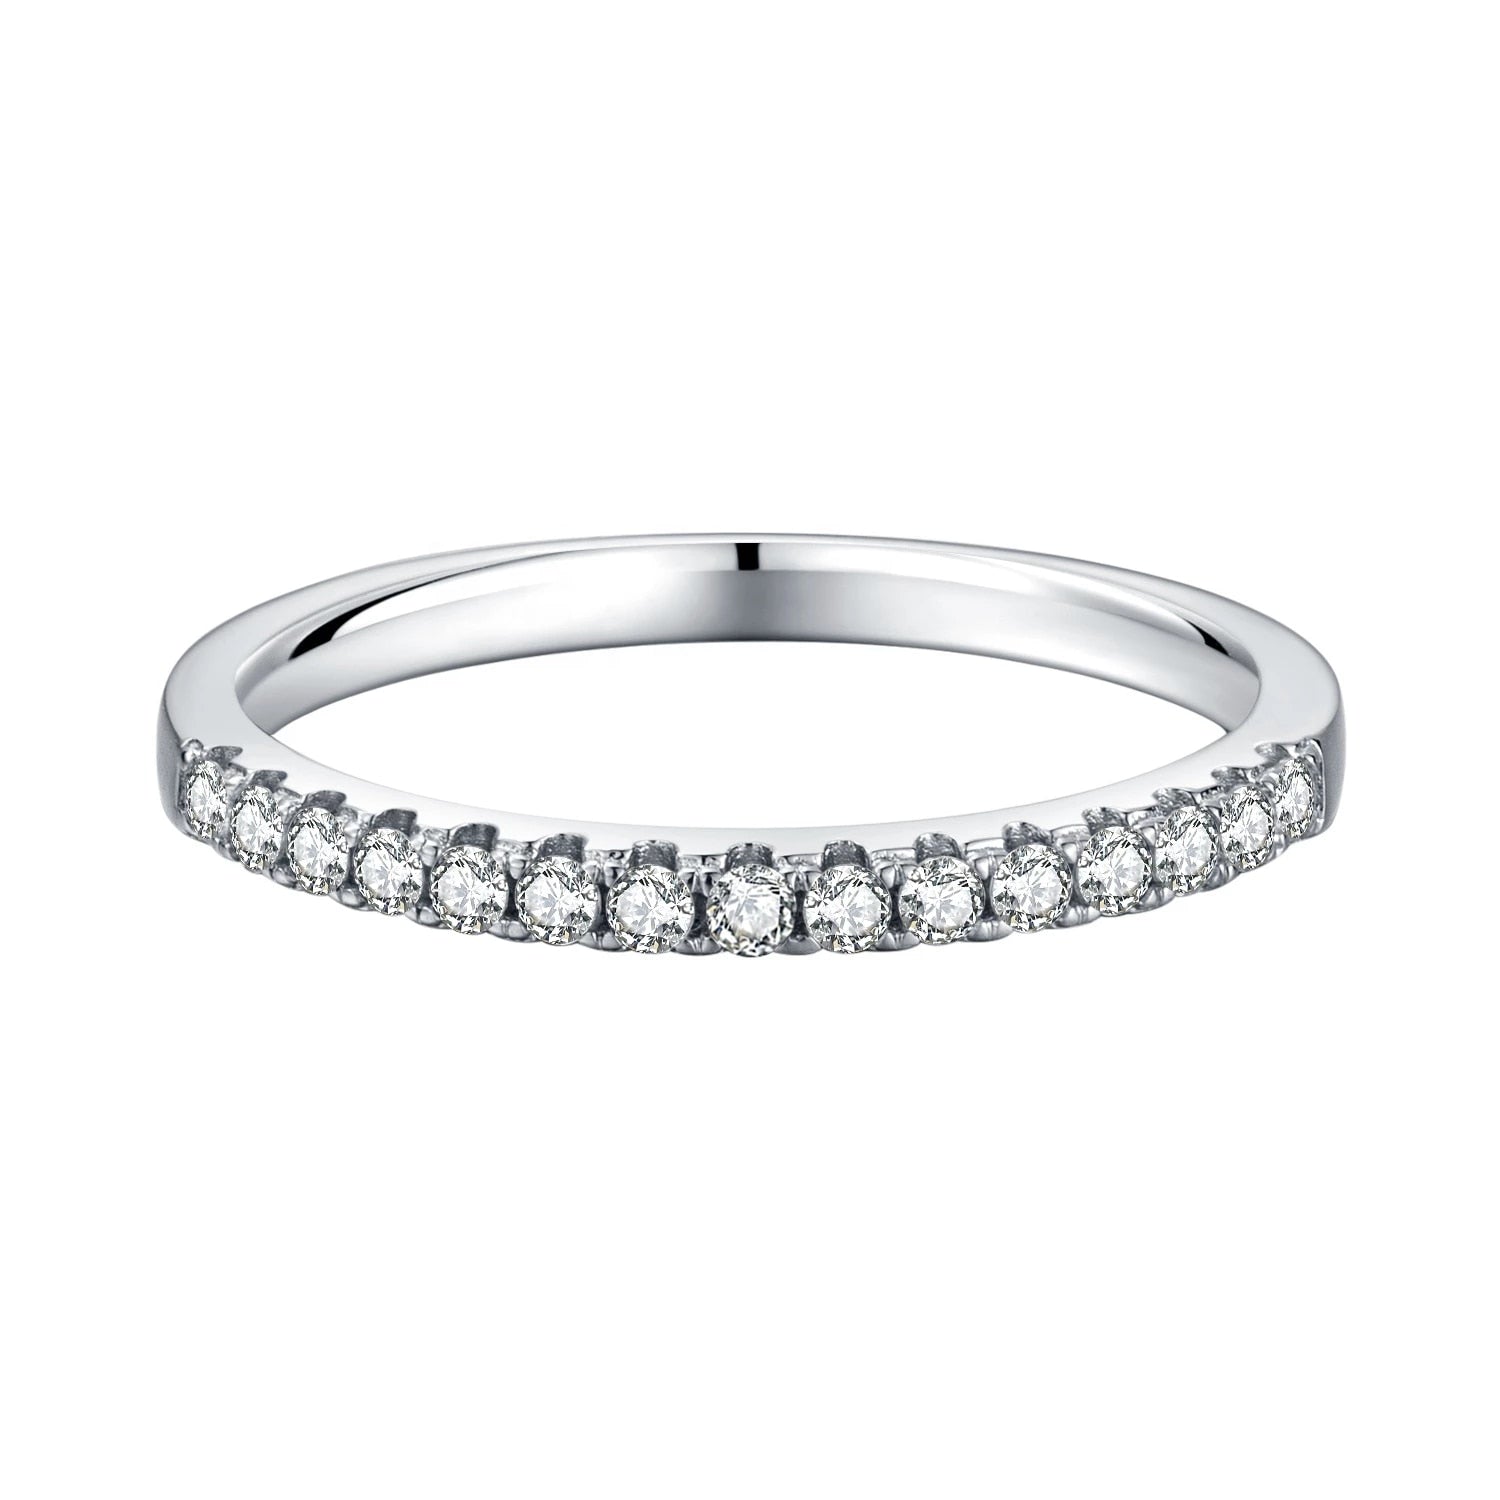 A silver eternity wedding ring prong set with moissanites